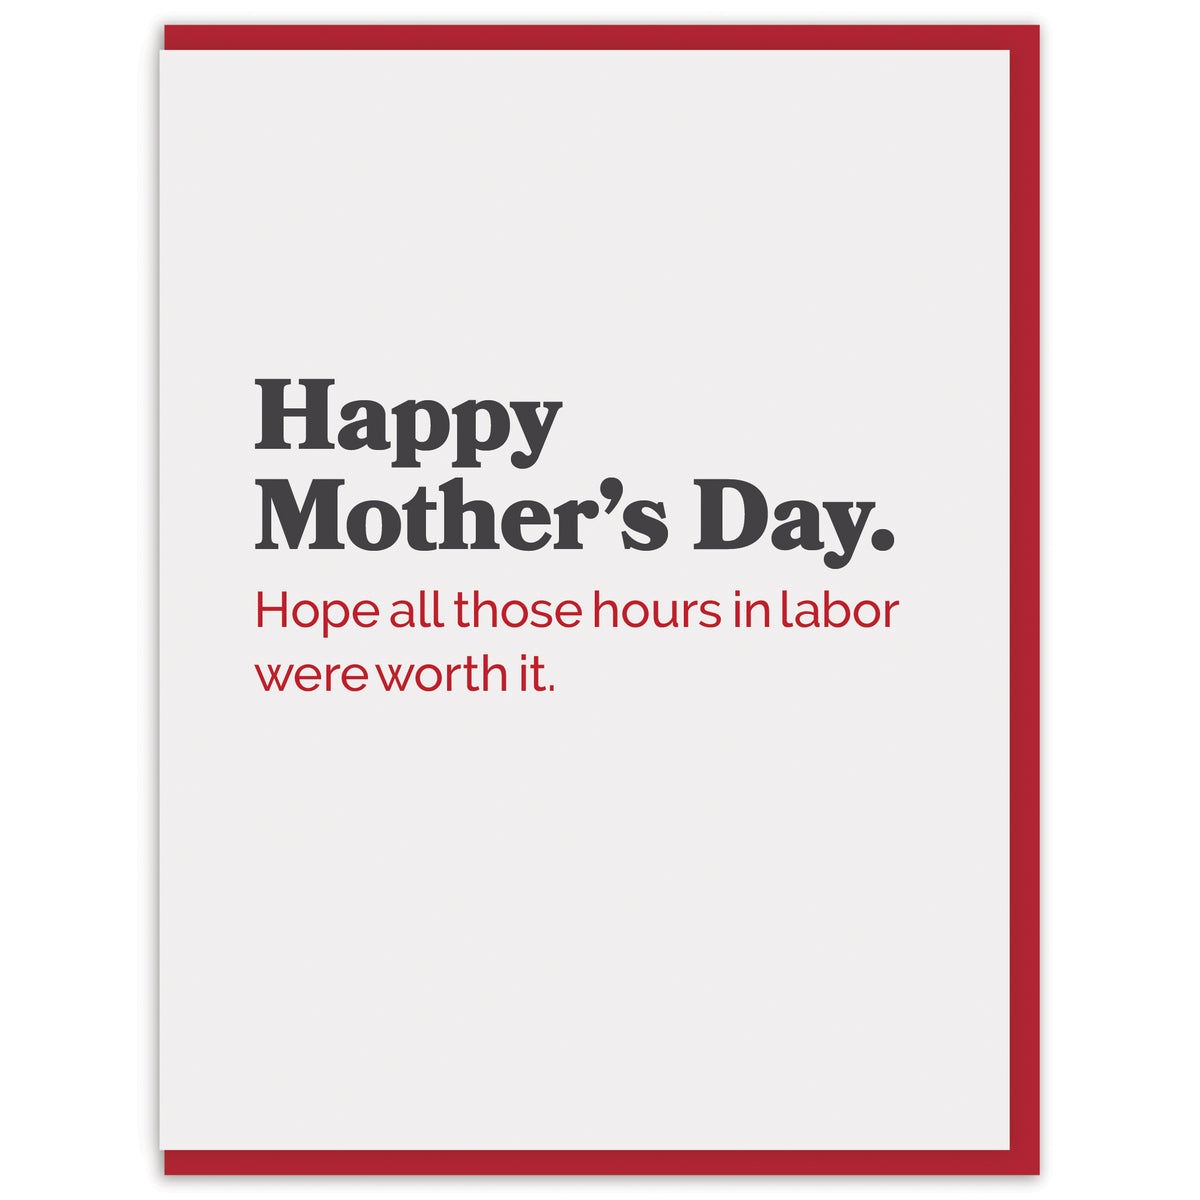 Happy Mother’s Day. Hope all those hours in labor were worth it.